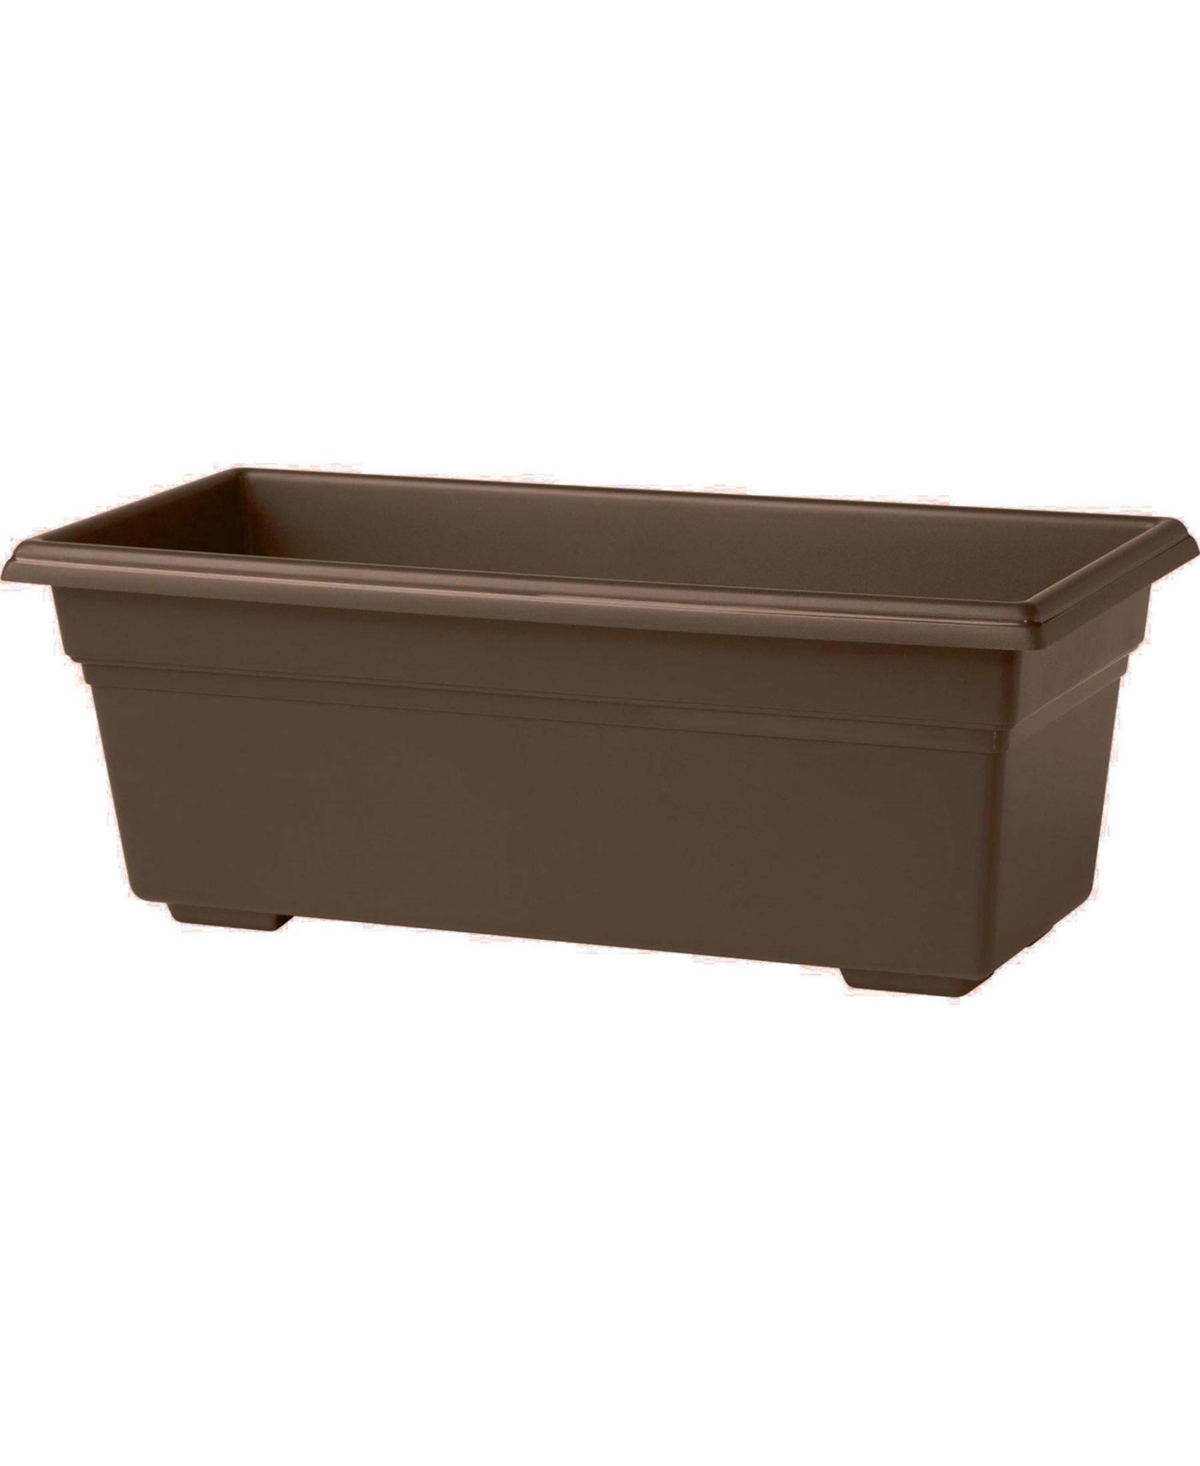 Countryside Patio Planter Brown 27" - Brown